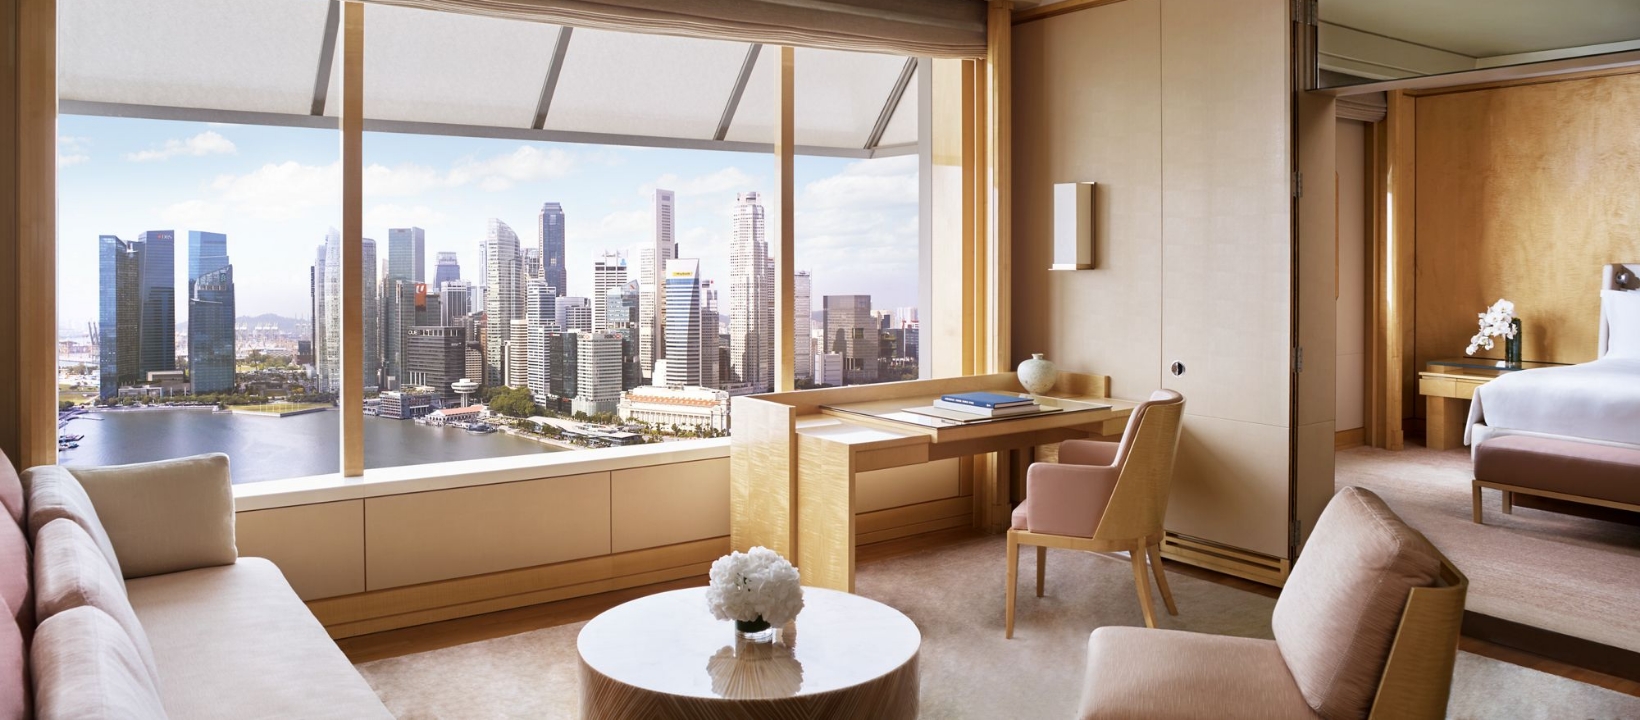 Ritz-Carlton deluxe suites with luxurious amenities and Singapore view